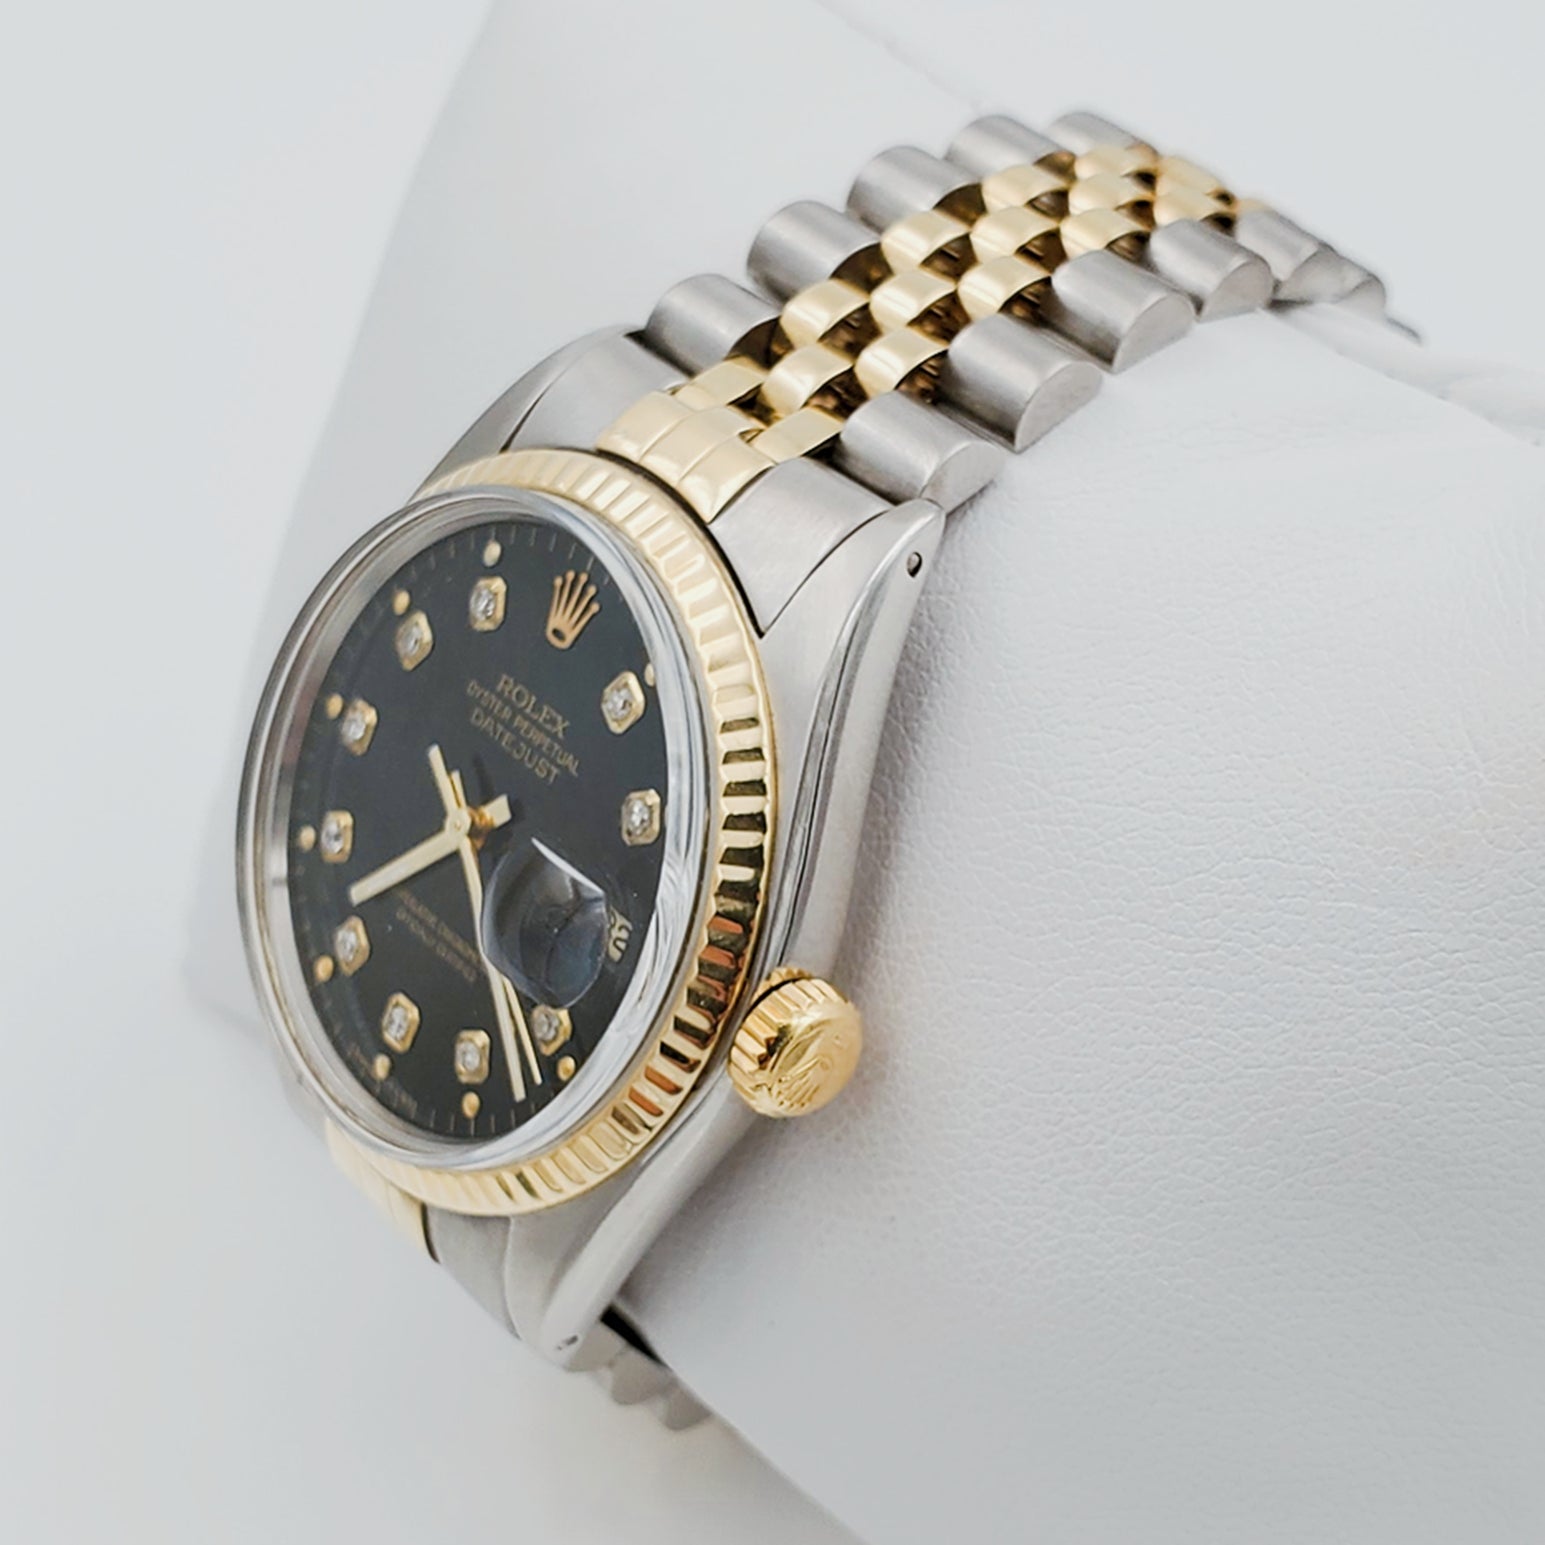 Men's Rolex 36mm DateJust 18K Gold / Stainless Steel Two-Tone Watch with Black Diamond Dial and Fluted Bezel. (Pre-Owned)